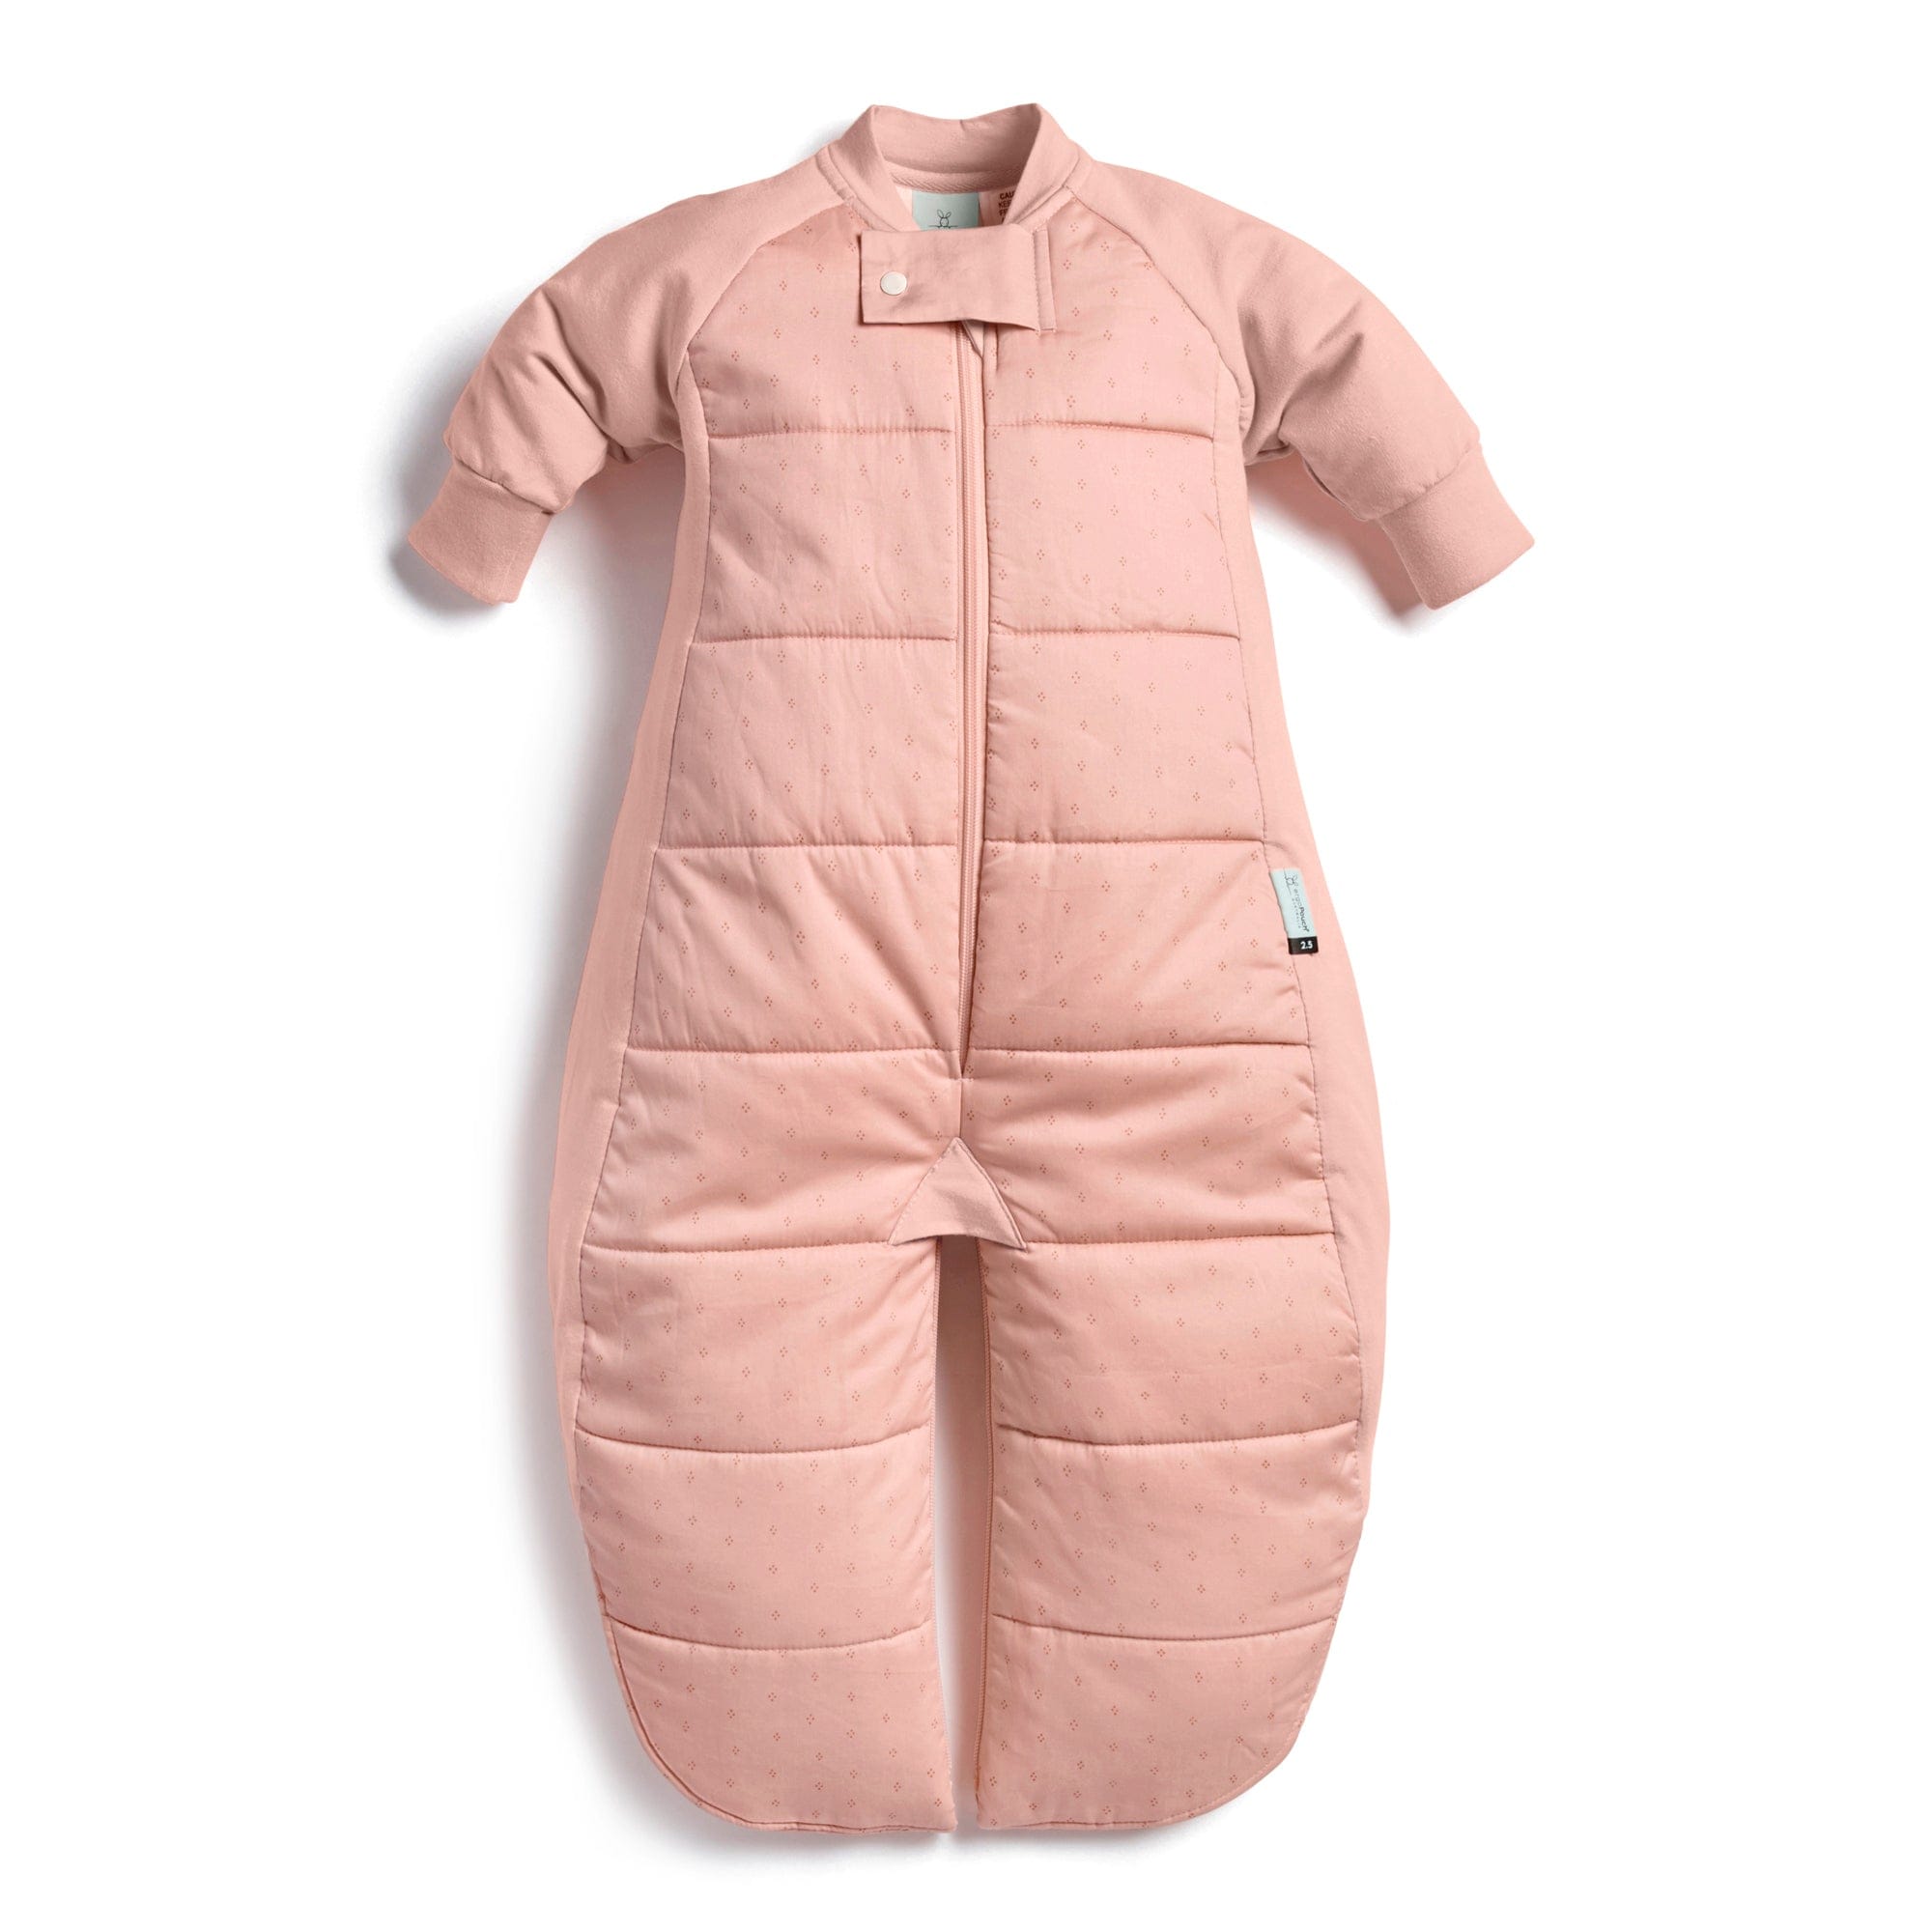 Sleep Suit Bag 2.5 Tog For Kids By ergoPouch - Berries